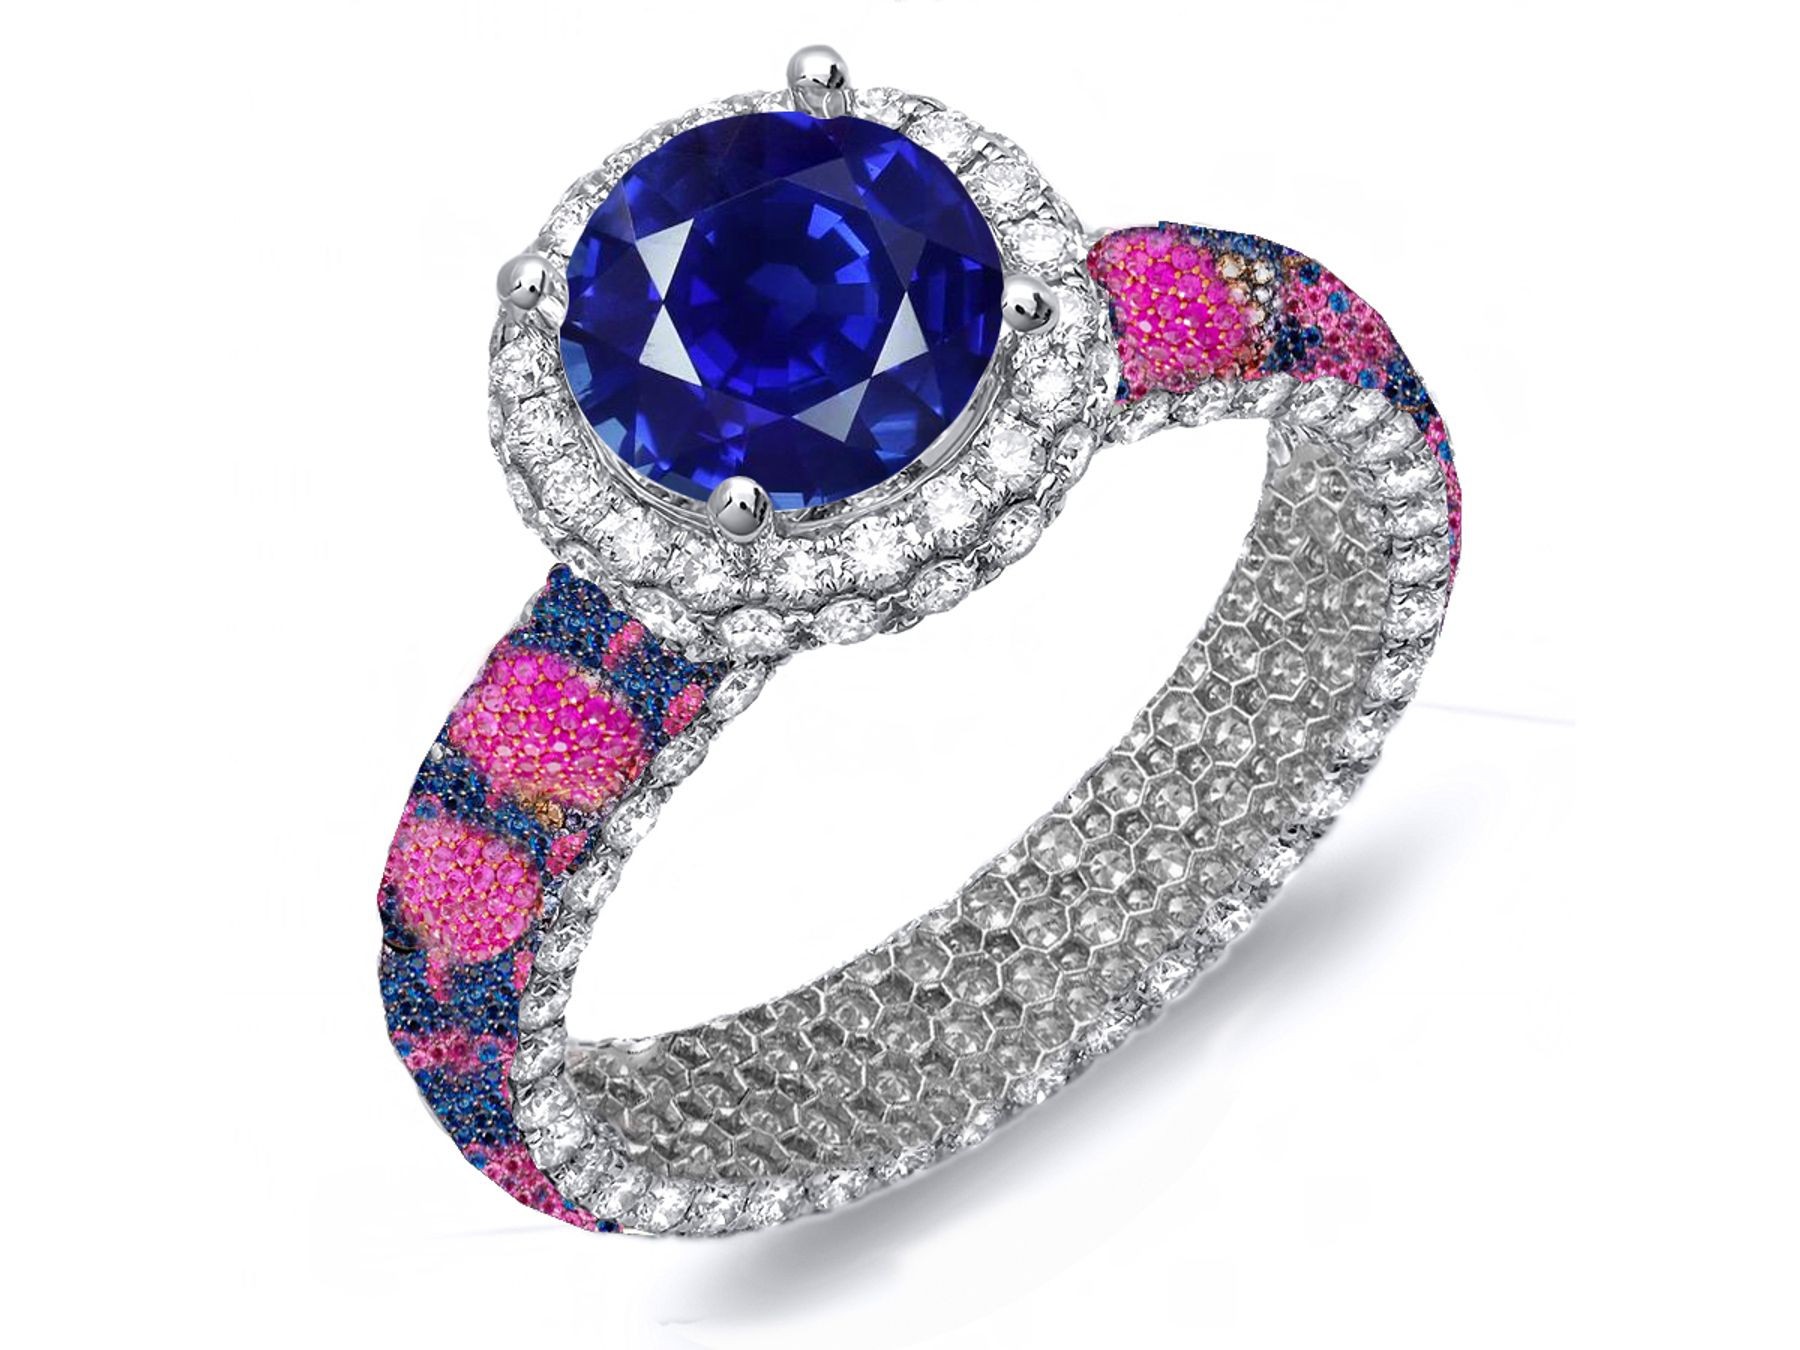 Hand-Made Pave Cluster Diamond & Multi-Colored Precious Stones Rubies, Emeralds & Blue, Pink, Purple, Yellow Sapphires